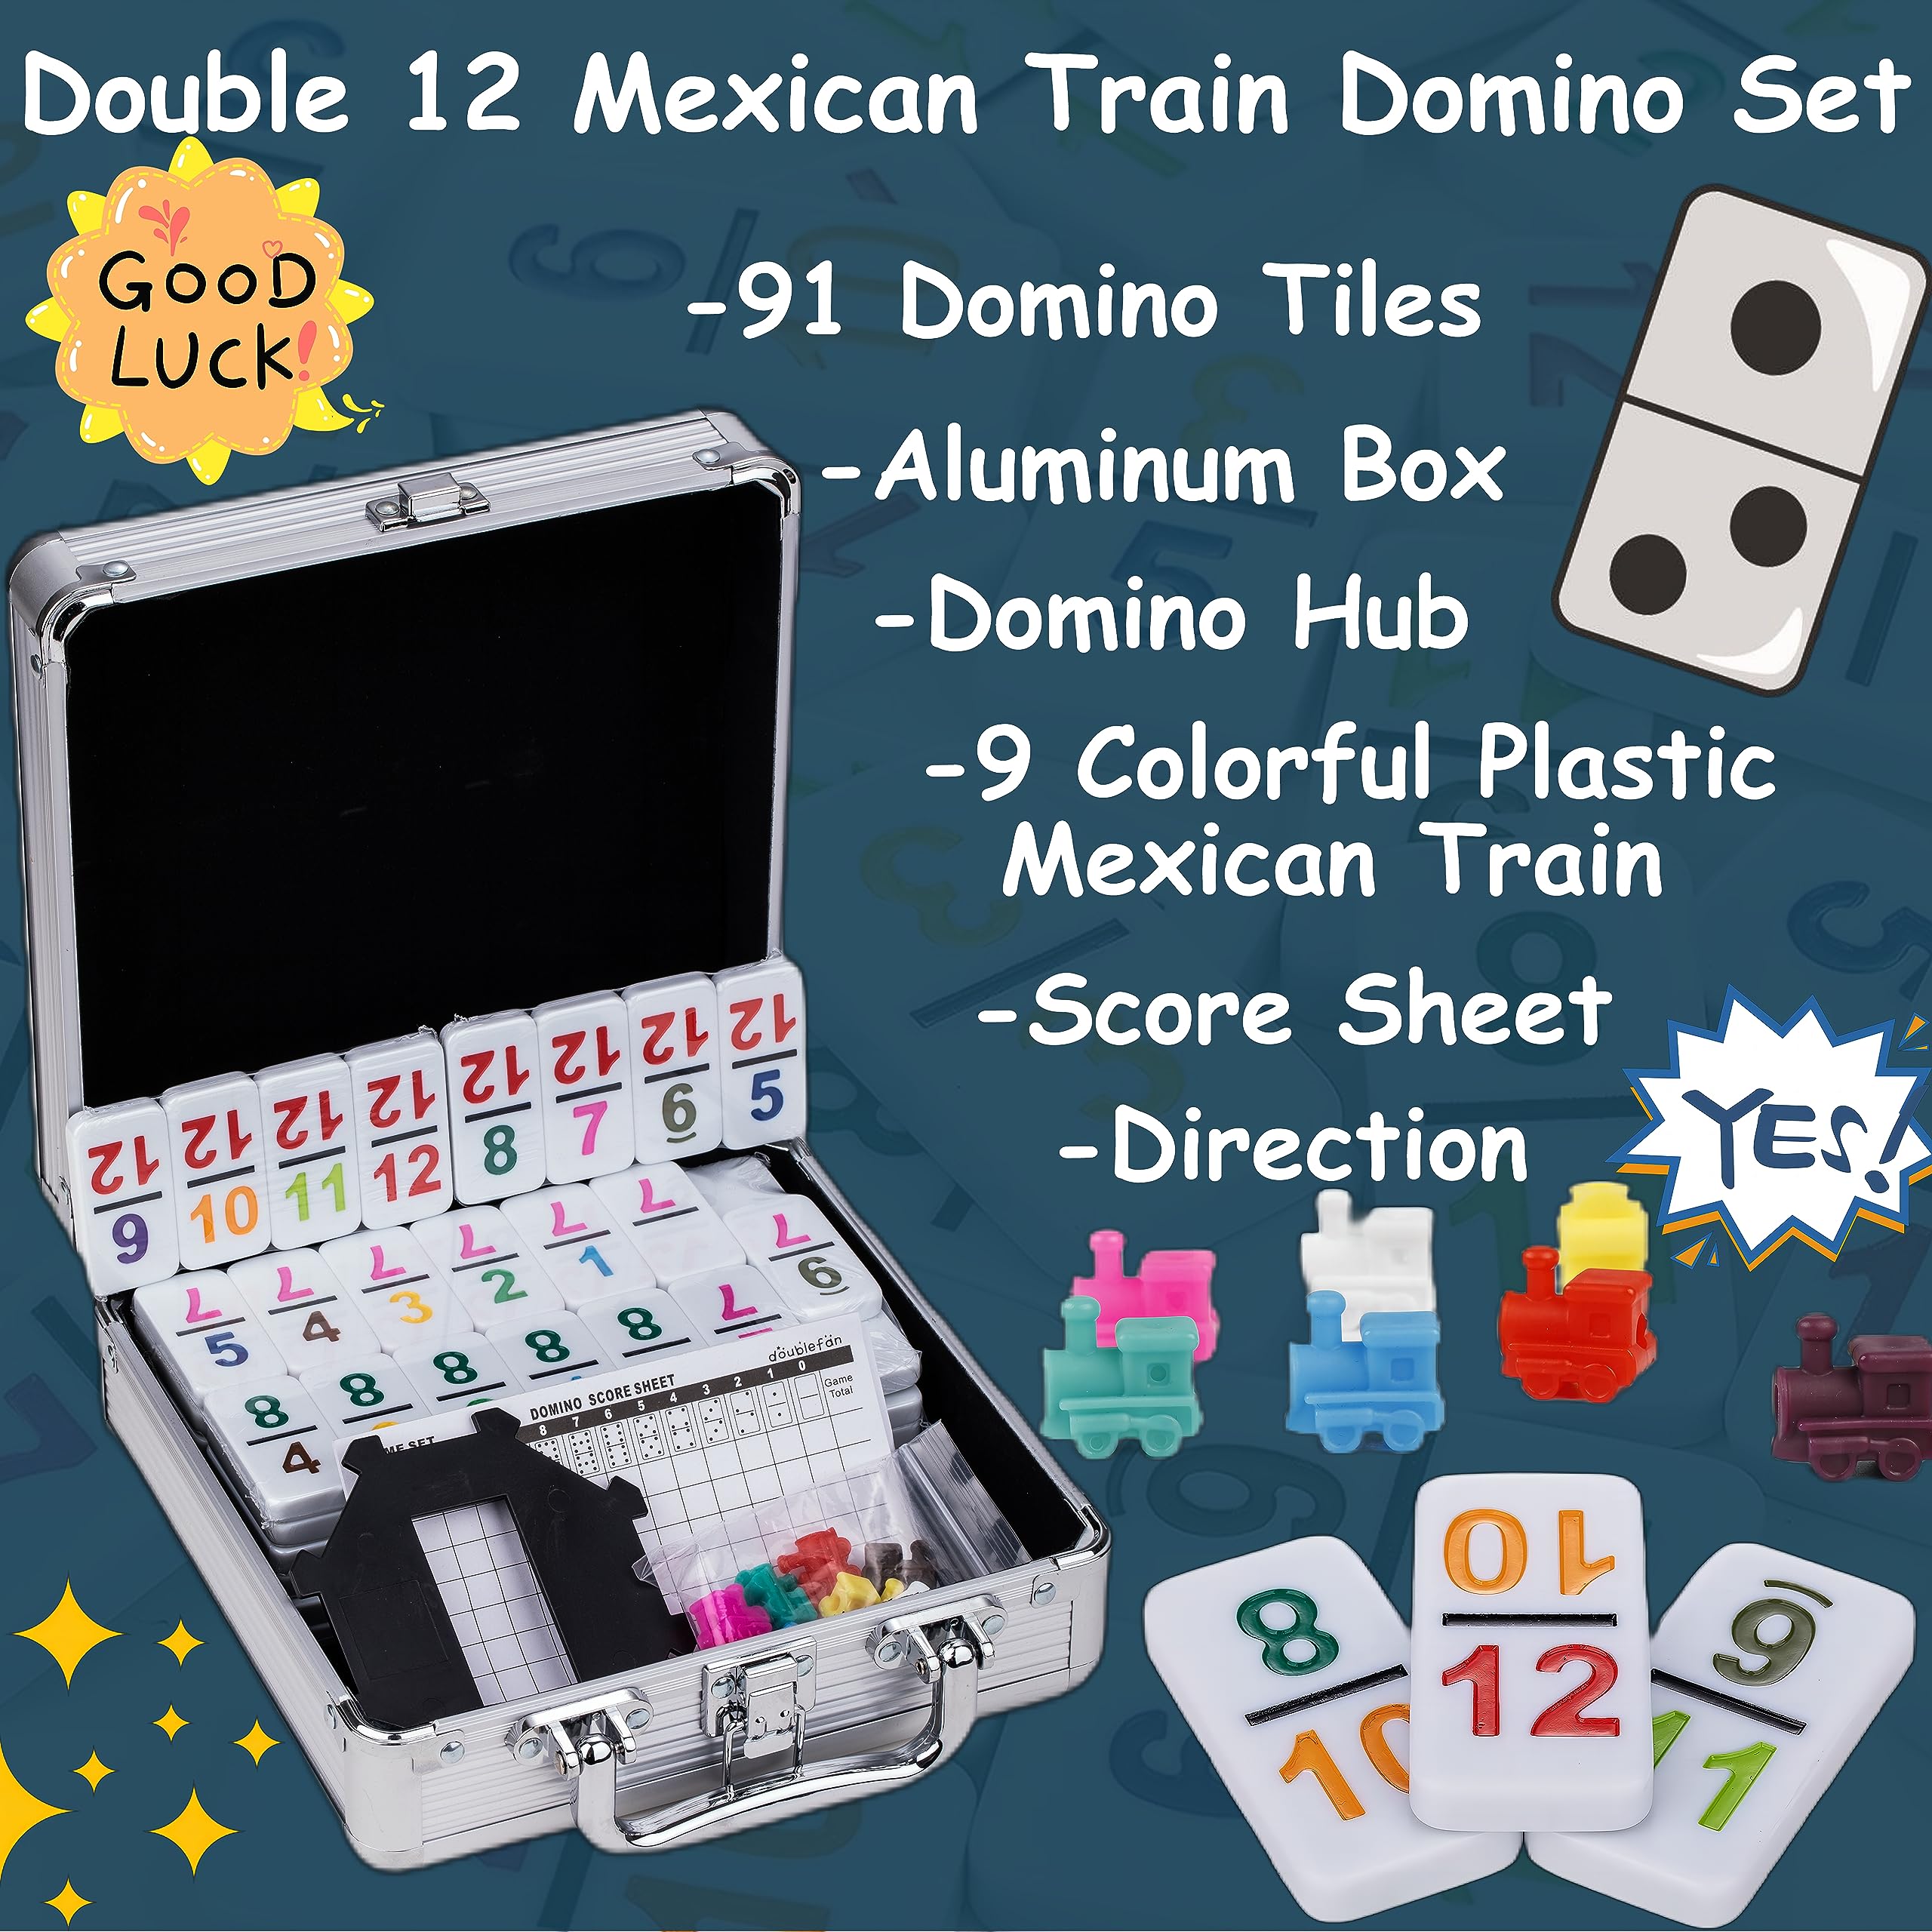 Doublefan Mexican Train Dominoes with Color Numbers,Double 12 Numerical Domino Game, Chicken Foot Dominoes Set with Aluminum Case, 91 Tiles Dominoï¼ˆ2-10 Player